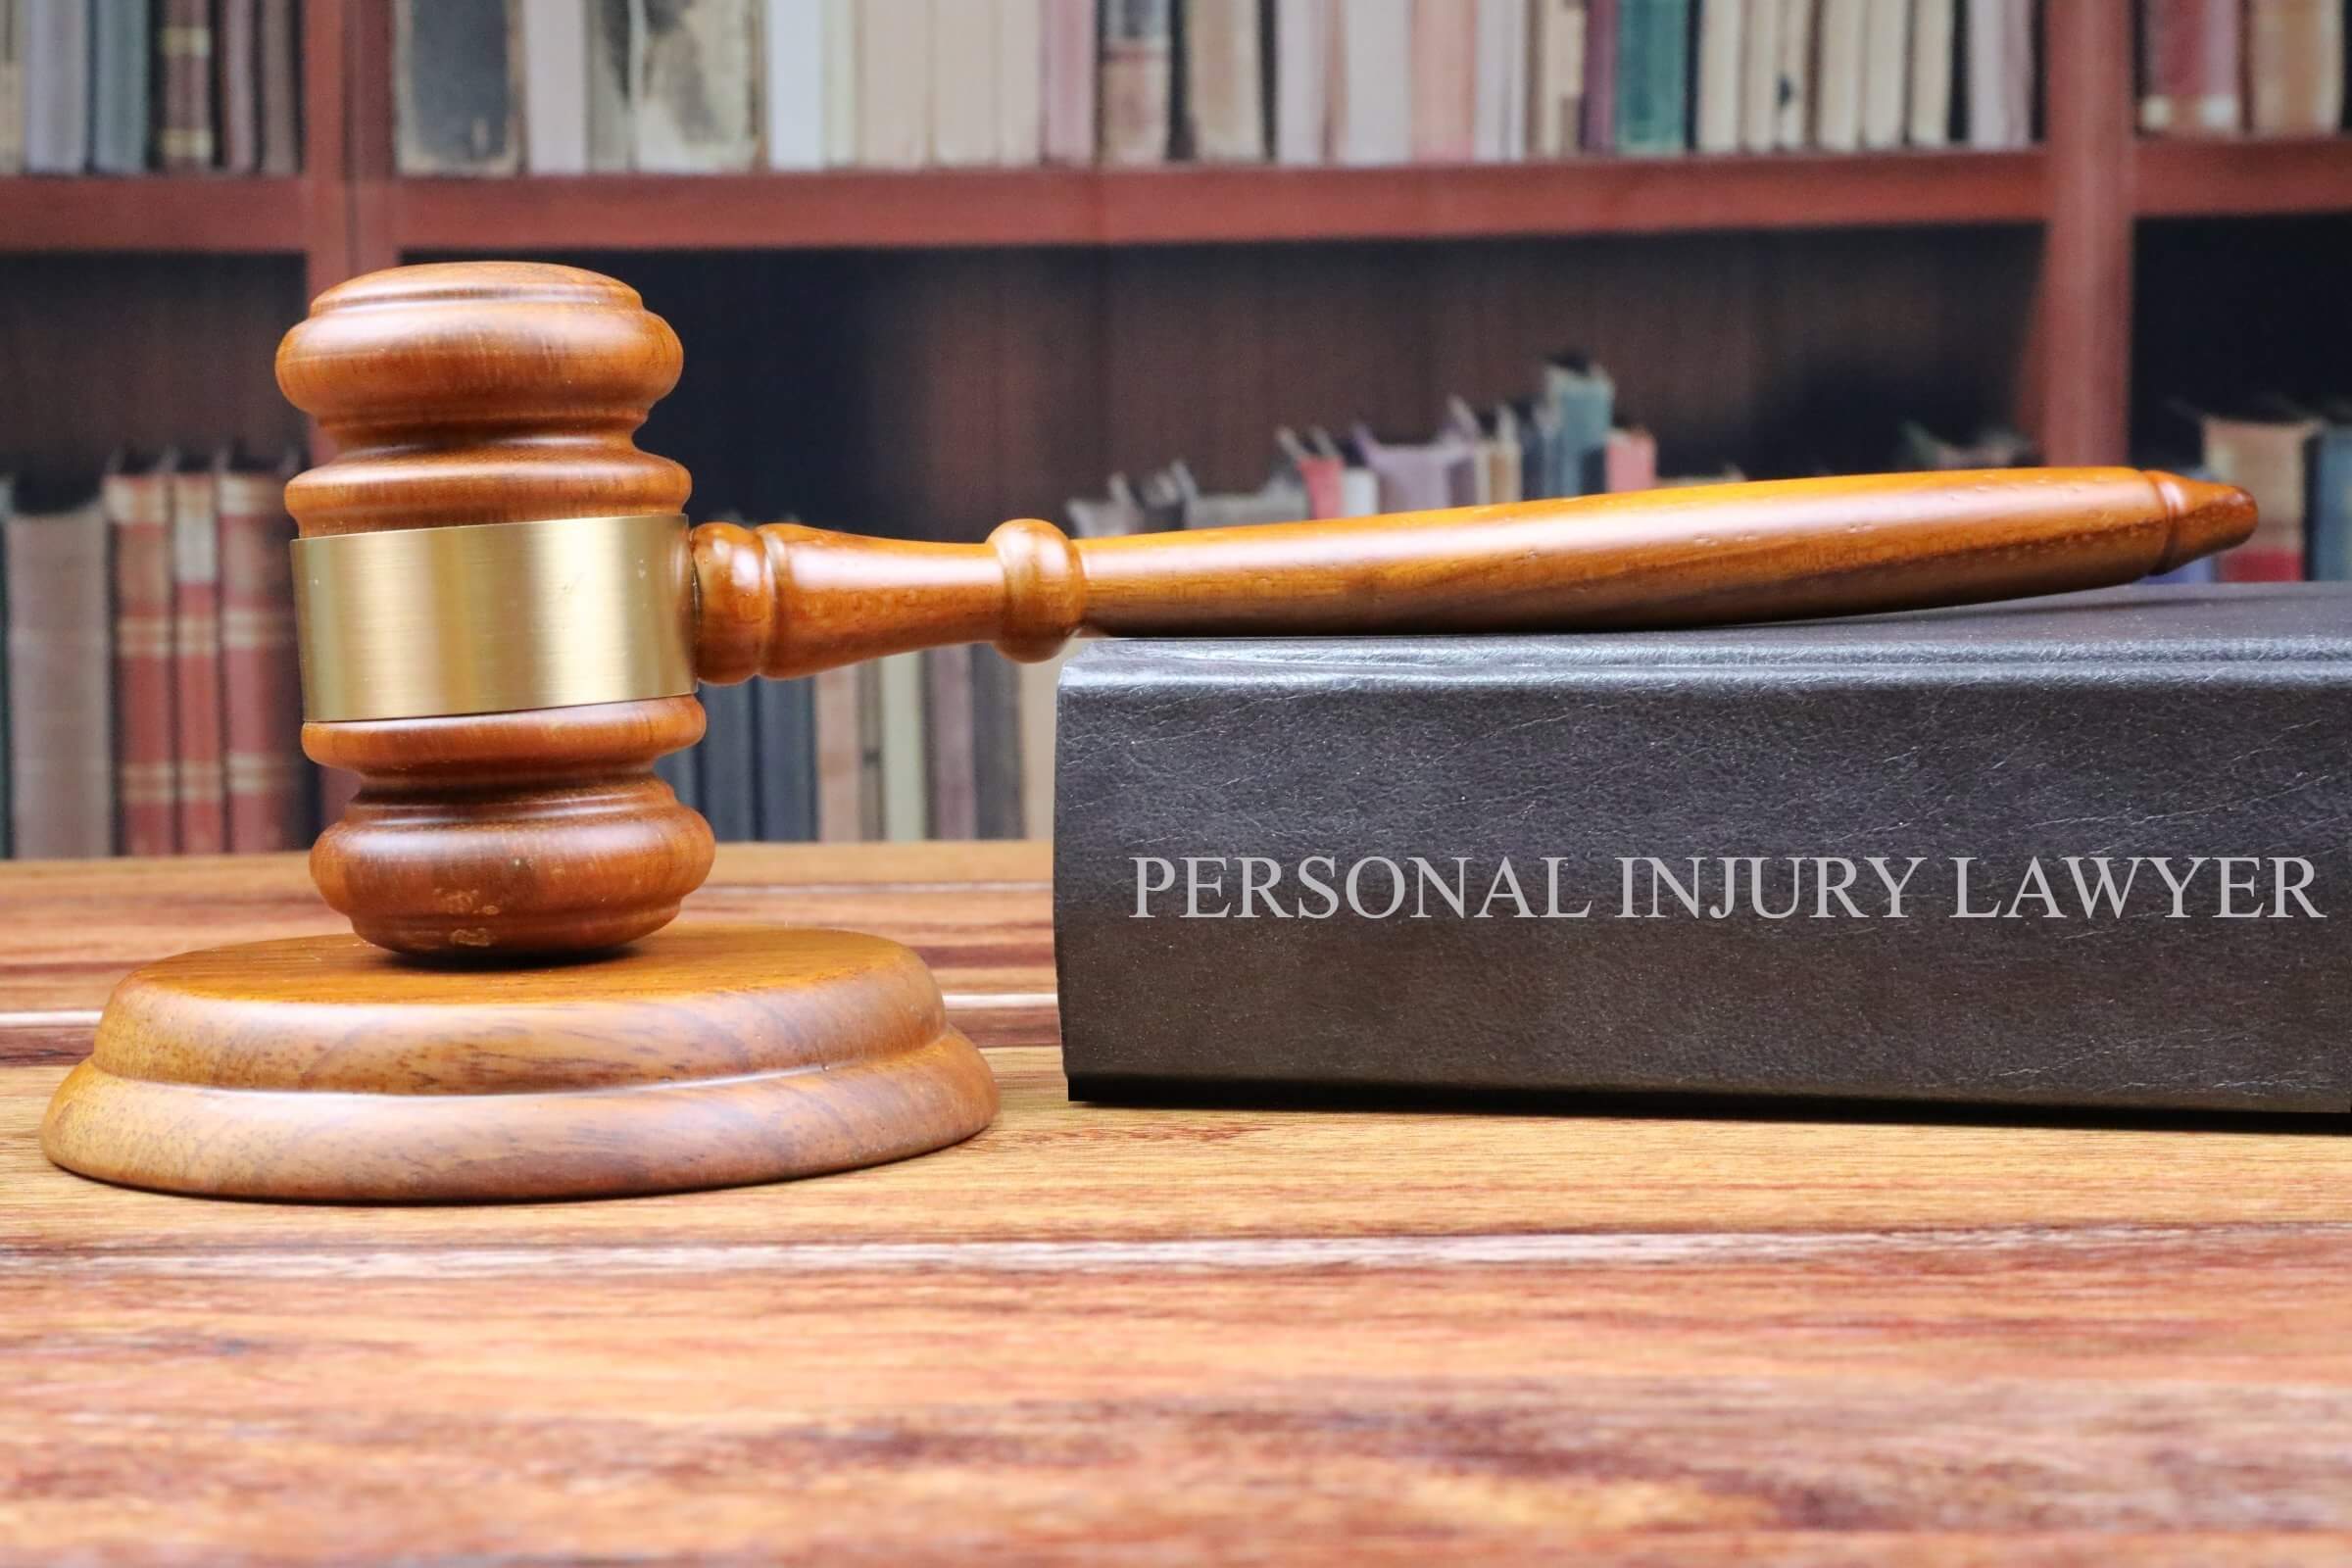 Best Personal Injury Lawyer in Cleveland, Ohio